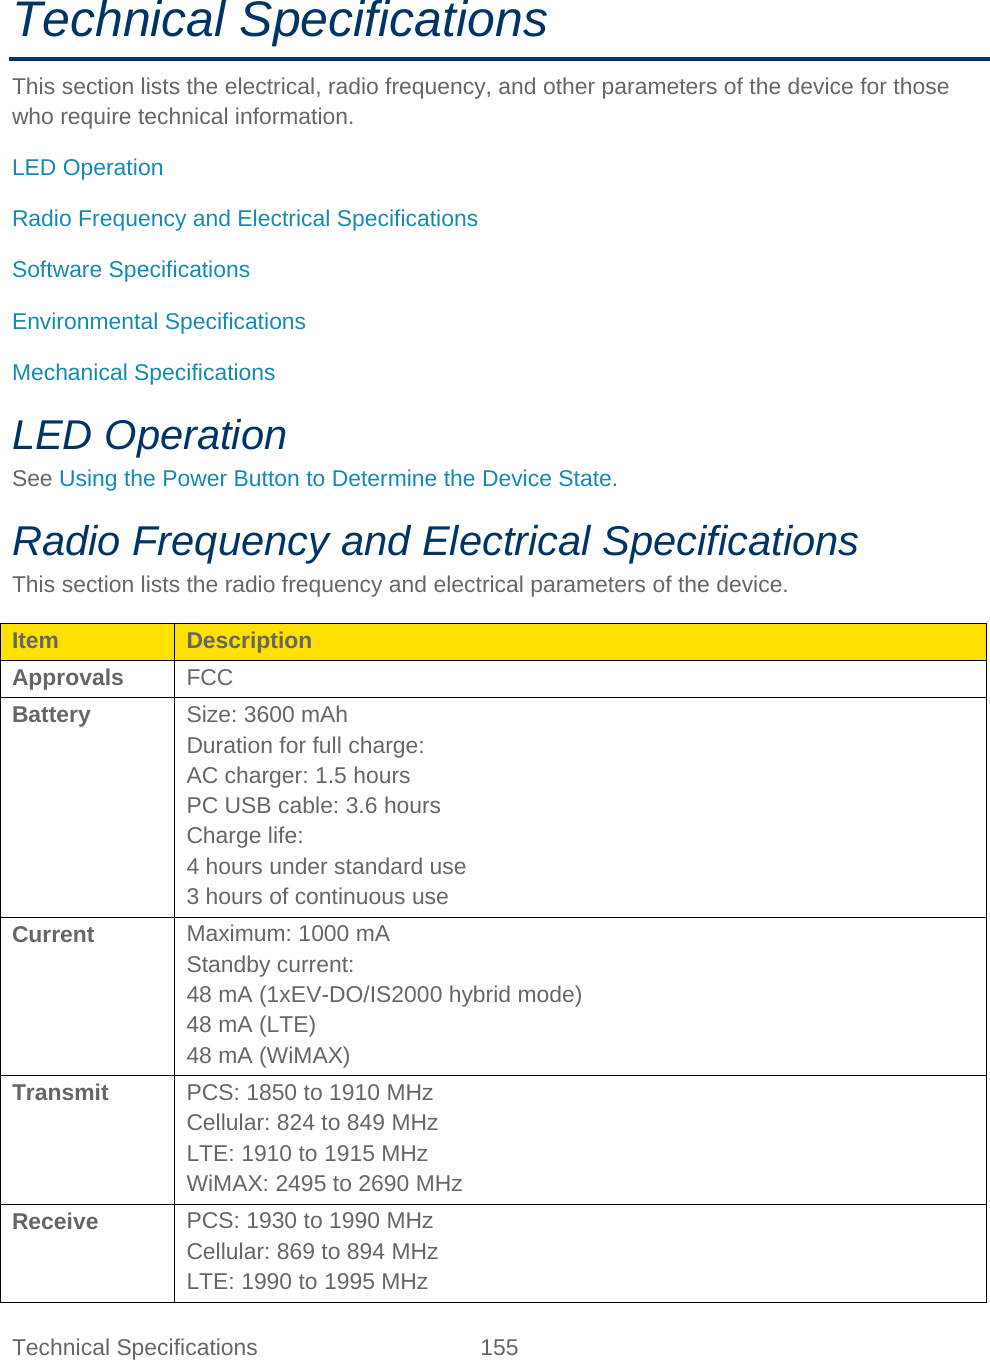 Technical Specifications 155   Technical Specifications This section lists the electrical, radio frequency, and other parameters of the device for those who require technical information. LED Operation Radio Frequency and Electrical Specifications Software Specifications Environmental Specifications Mechanical Specifications LED Operation See Using the Power Button to Determine the Device State. Radio Frequency and Electrical Specifications This section lists the radio frequency and electrical parameters of the device. Item Description Approvals FCC Battery Size: 3600 mAh Duration for full charge: AC charger: 1.5 hours PC USB cable: 3.6 hours Charge life: 4 hours under standard use 3 hours of continuous use Current Maximum: 1000 mA Standby current: 48 mA (1xEV-DO/IS2000 hybrid mode) 48 mA (LTE) 48 mA (WiMAX) Transmit PCS: 1850 to 1910 MHz Cellular: 824 to 849 MHz LTE: 1910 to 1915 MHz WiMAX: 2495 to 2690 MHz Receive PCS: 1930 to 1990 MHz Cellular: 869 to 894 MHz LTE: 1990 to 1995 MHz 